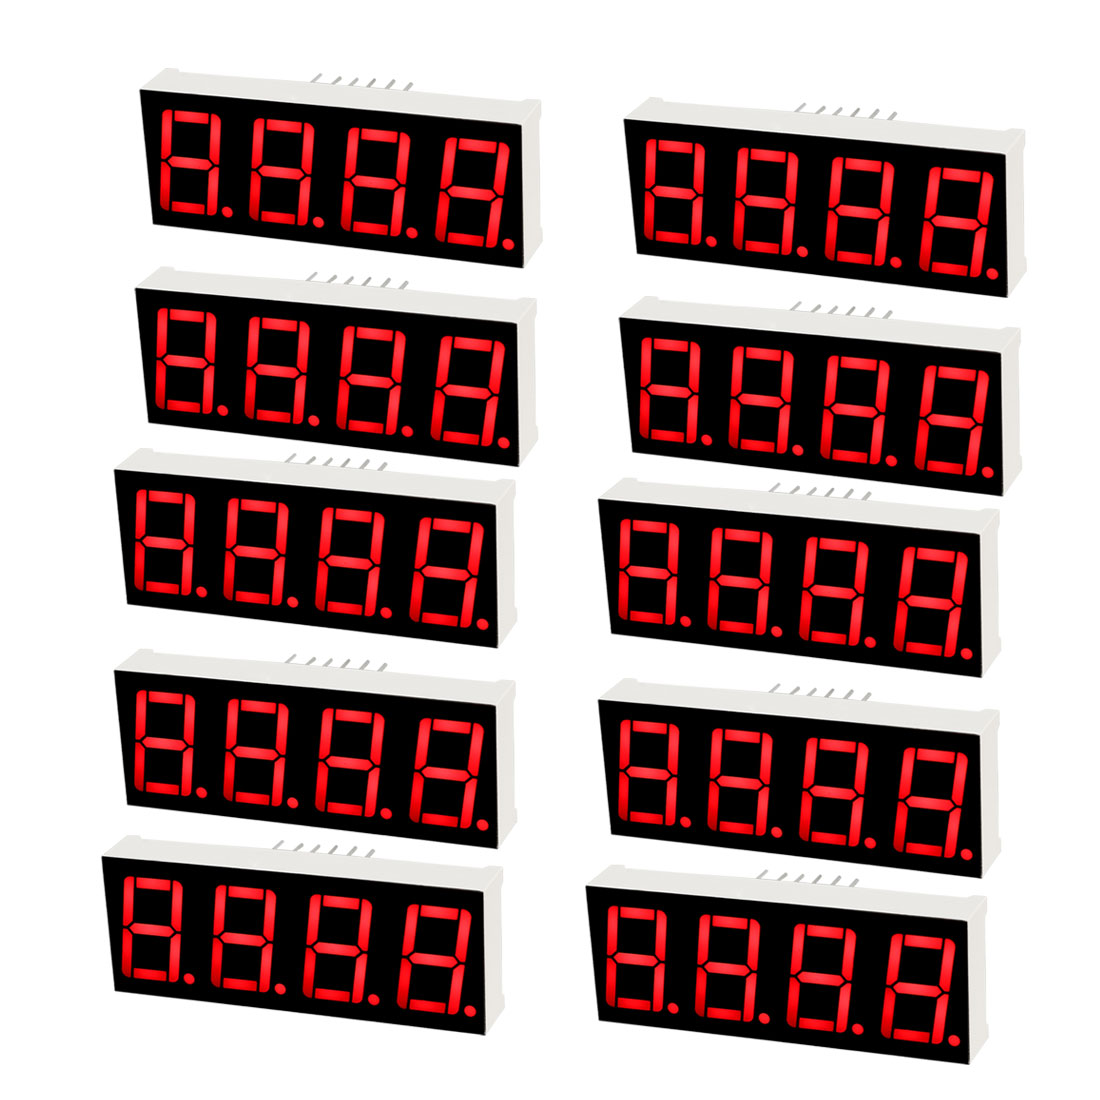 uxcell Uxcell Common Cathode 12Pin 4 Bit 7 Segment 1.98 x 0.75 x 0.31 Inch 0.55" Red LED Display Digital Tube 10pcs